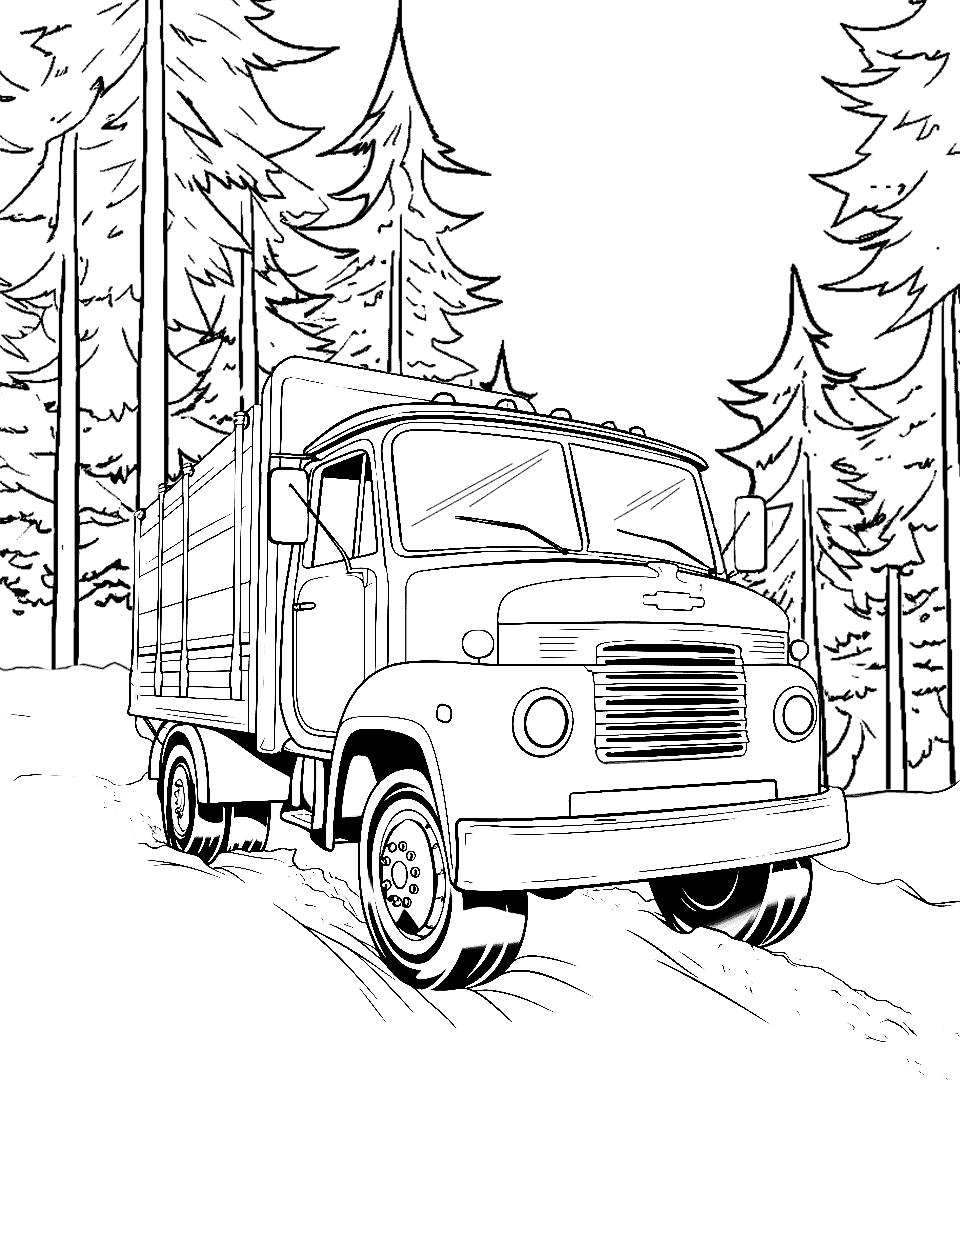 Snowy Delivery Coloring Page - A diesel truck carefully driving on a snowy winter road.